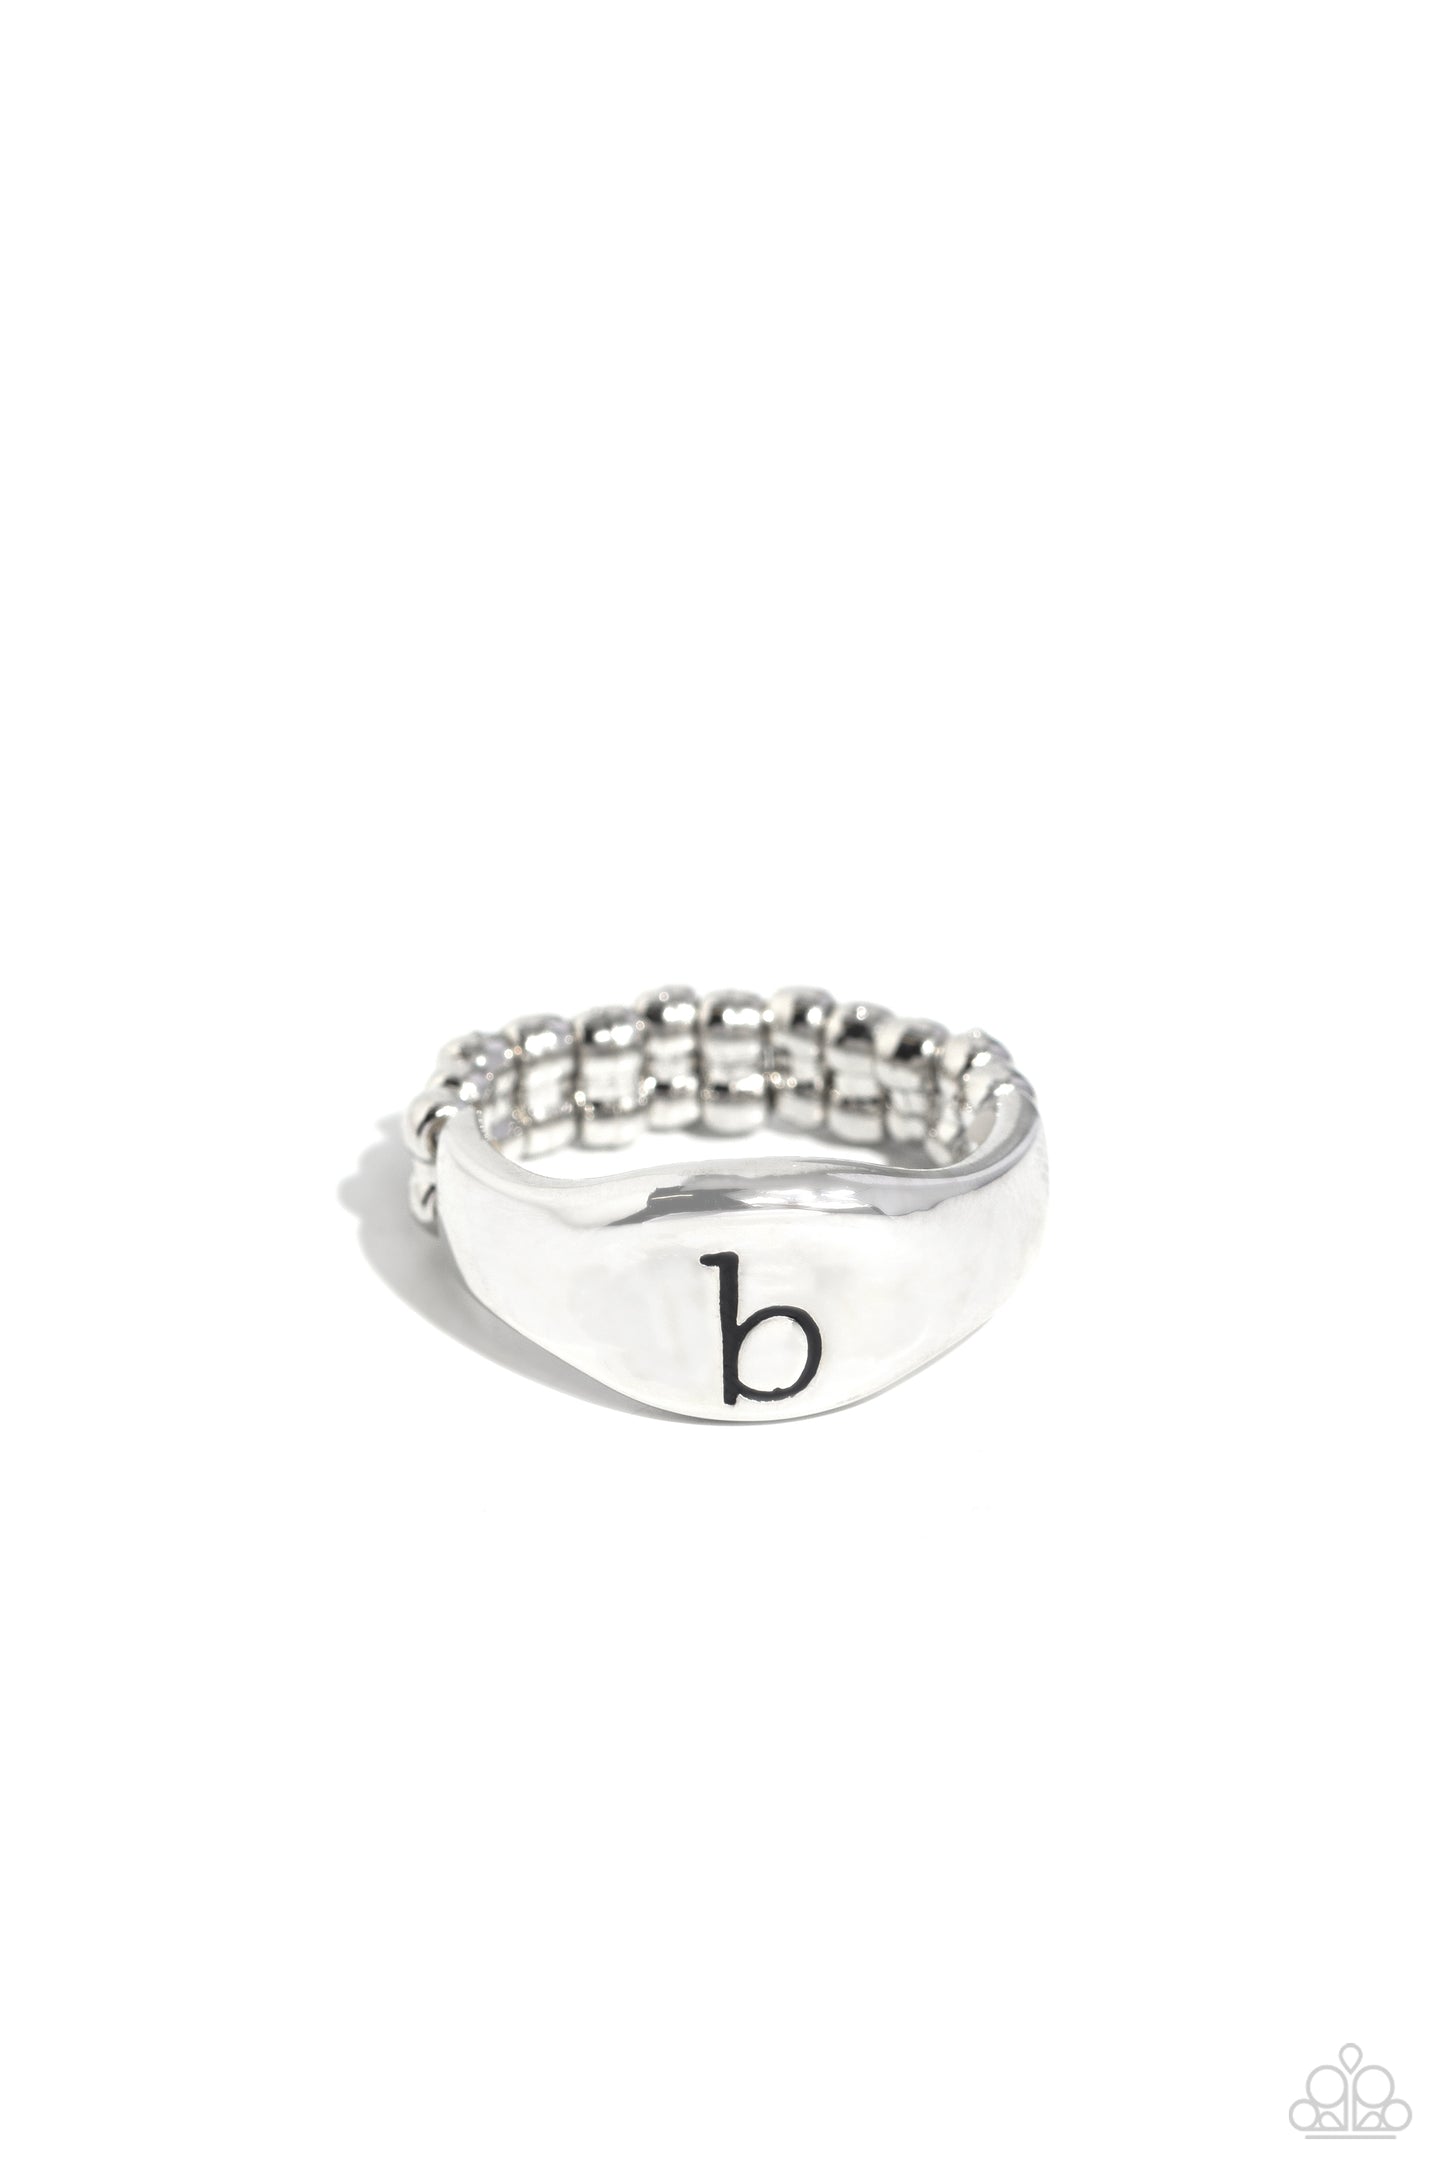 Paparazzi Accessories - Monogram Memento - Silver - B Rings Initials New Releases